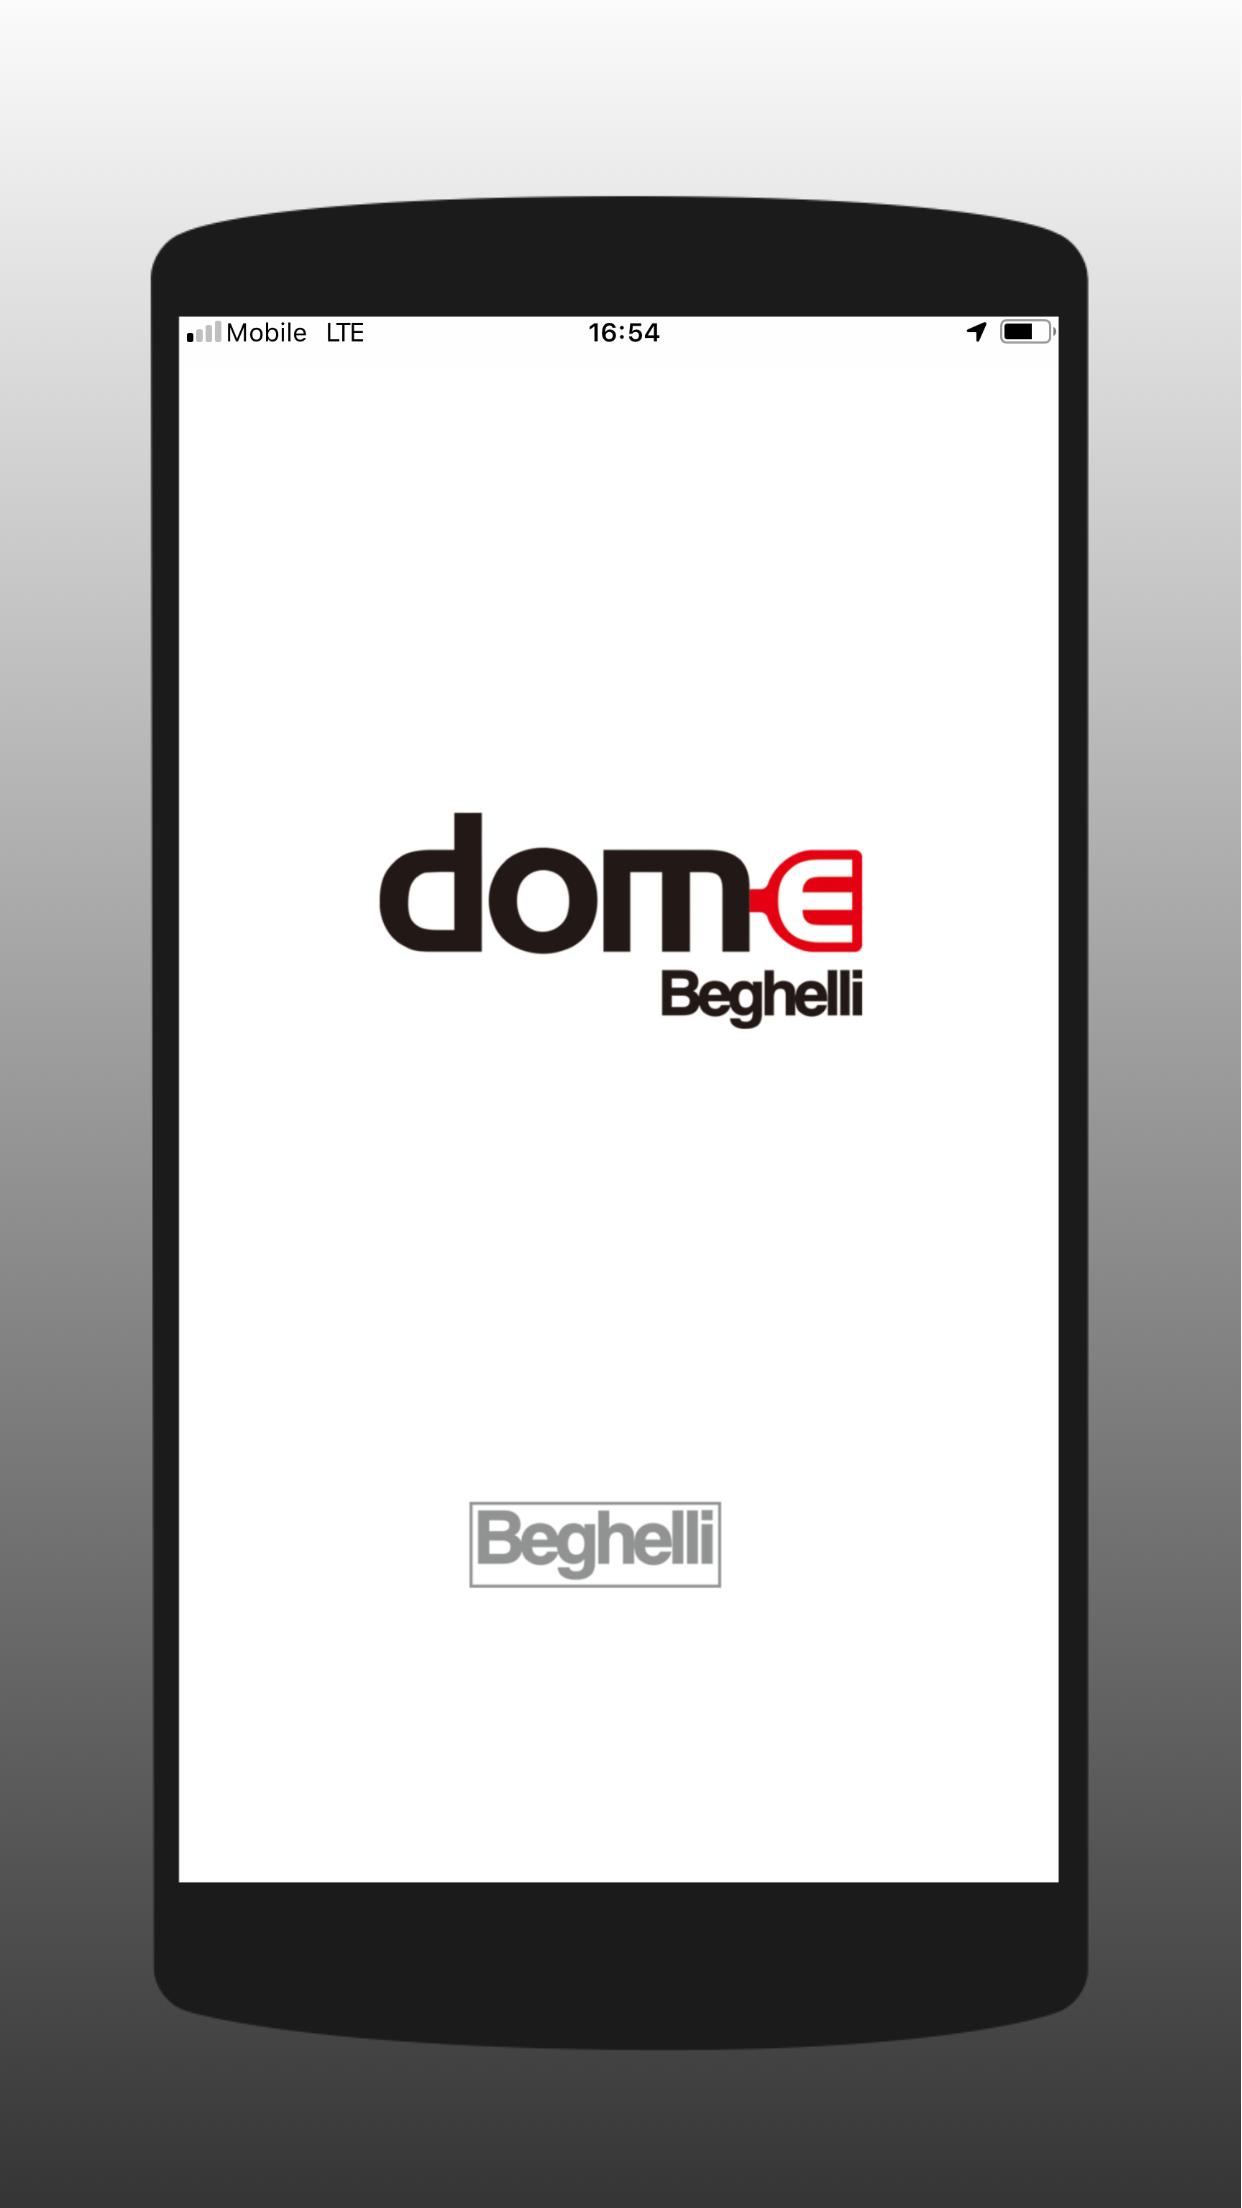 Download dom-e Beghelli android on PC